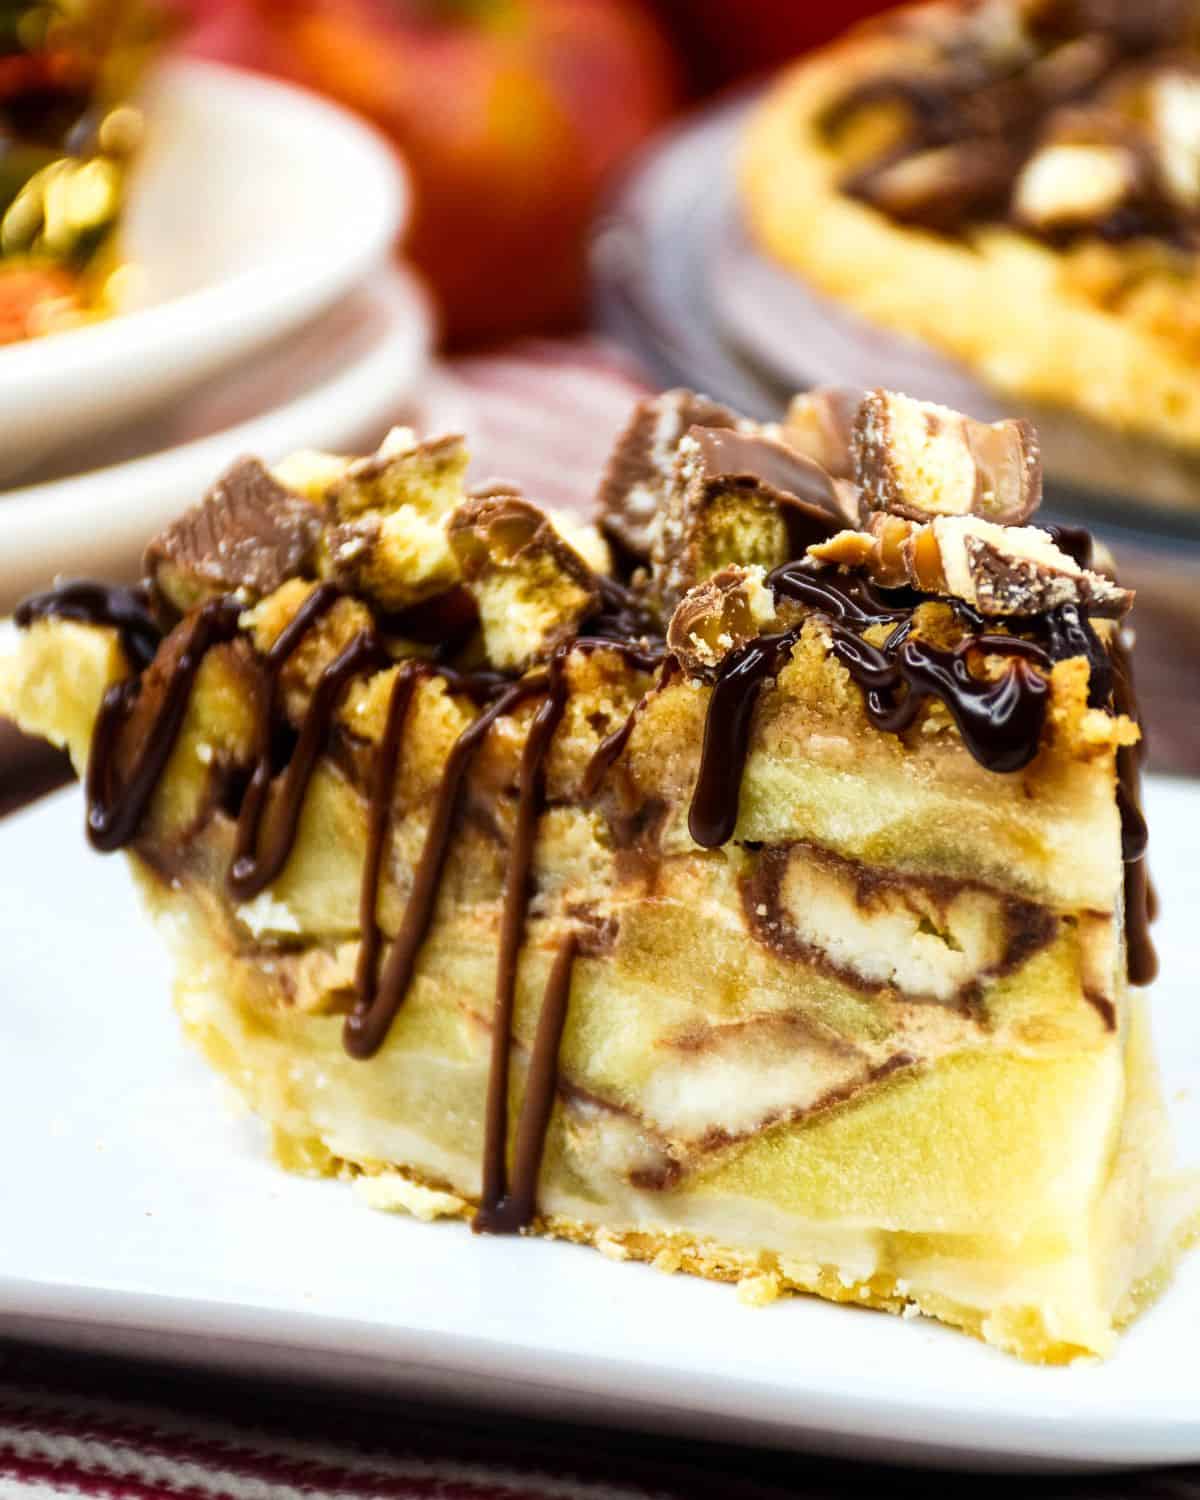 A slice of twix caramel apple crumble on a plate.